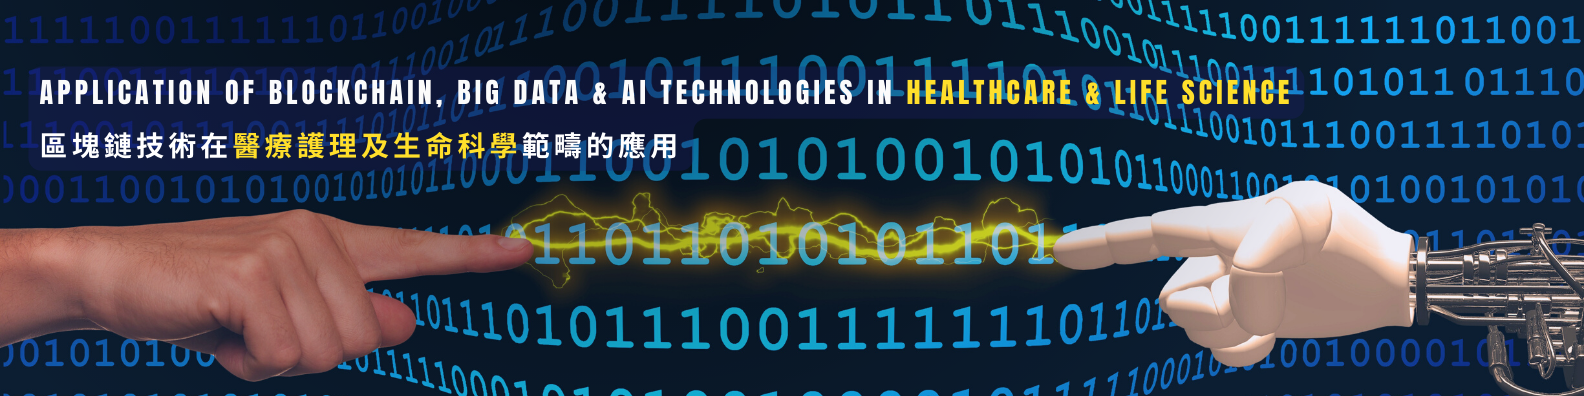 Application of Blockchain technology in healthcare and life science | AI handling of patient data | Blockchain and the future of legal services